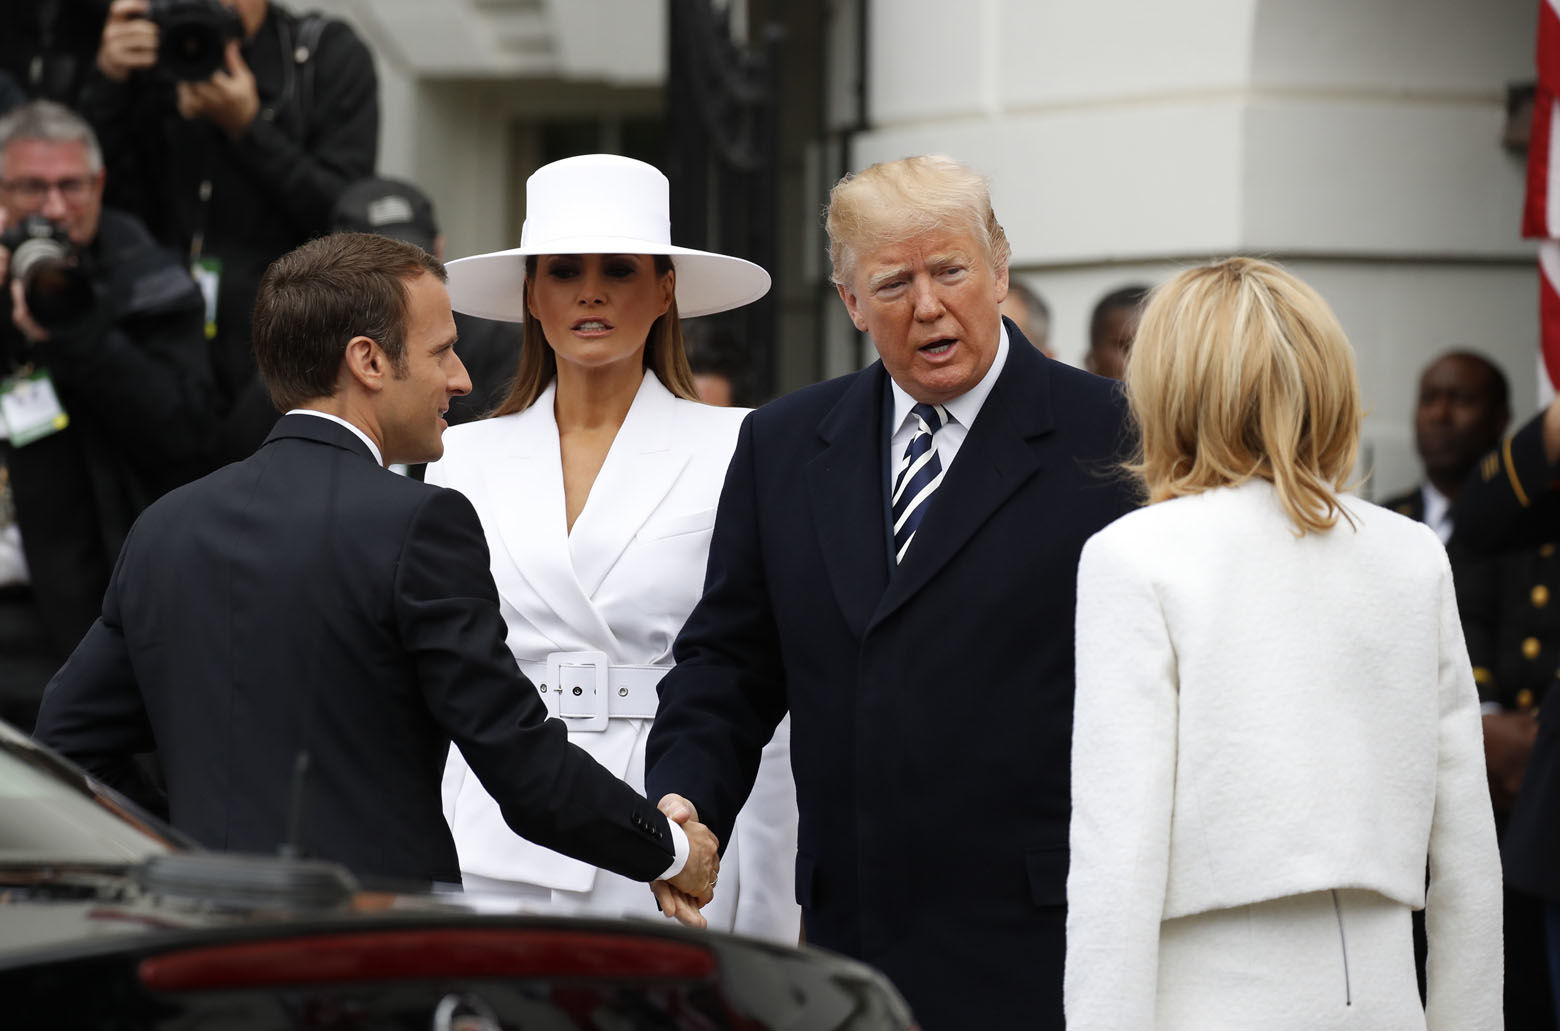 President Donald Trump and first lady Melania Trump welcome French President Emmanuel Macron and his wife Brigitte Macron during a State Arrival Ceremony on the South Lawn of the White House in Washington, Tuesday, April 24, 2018. (AP Photo/Carolyn Kaster)